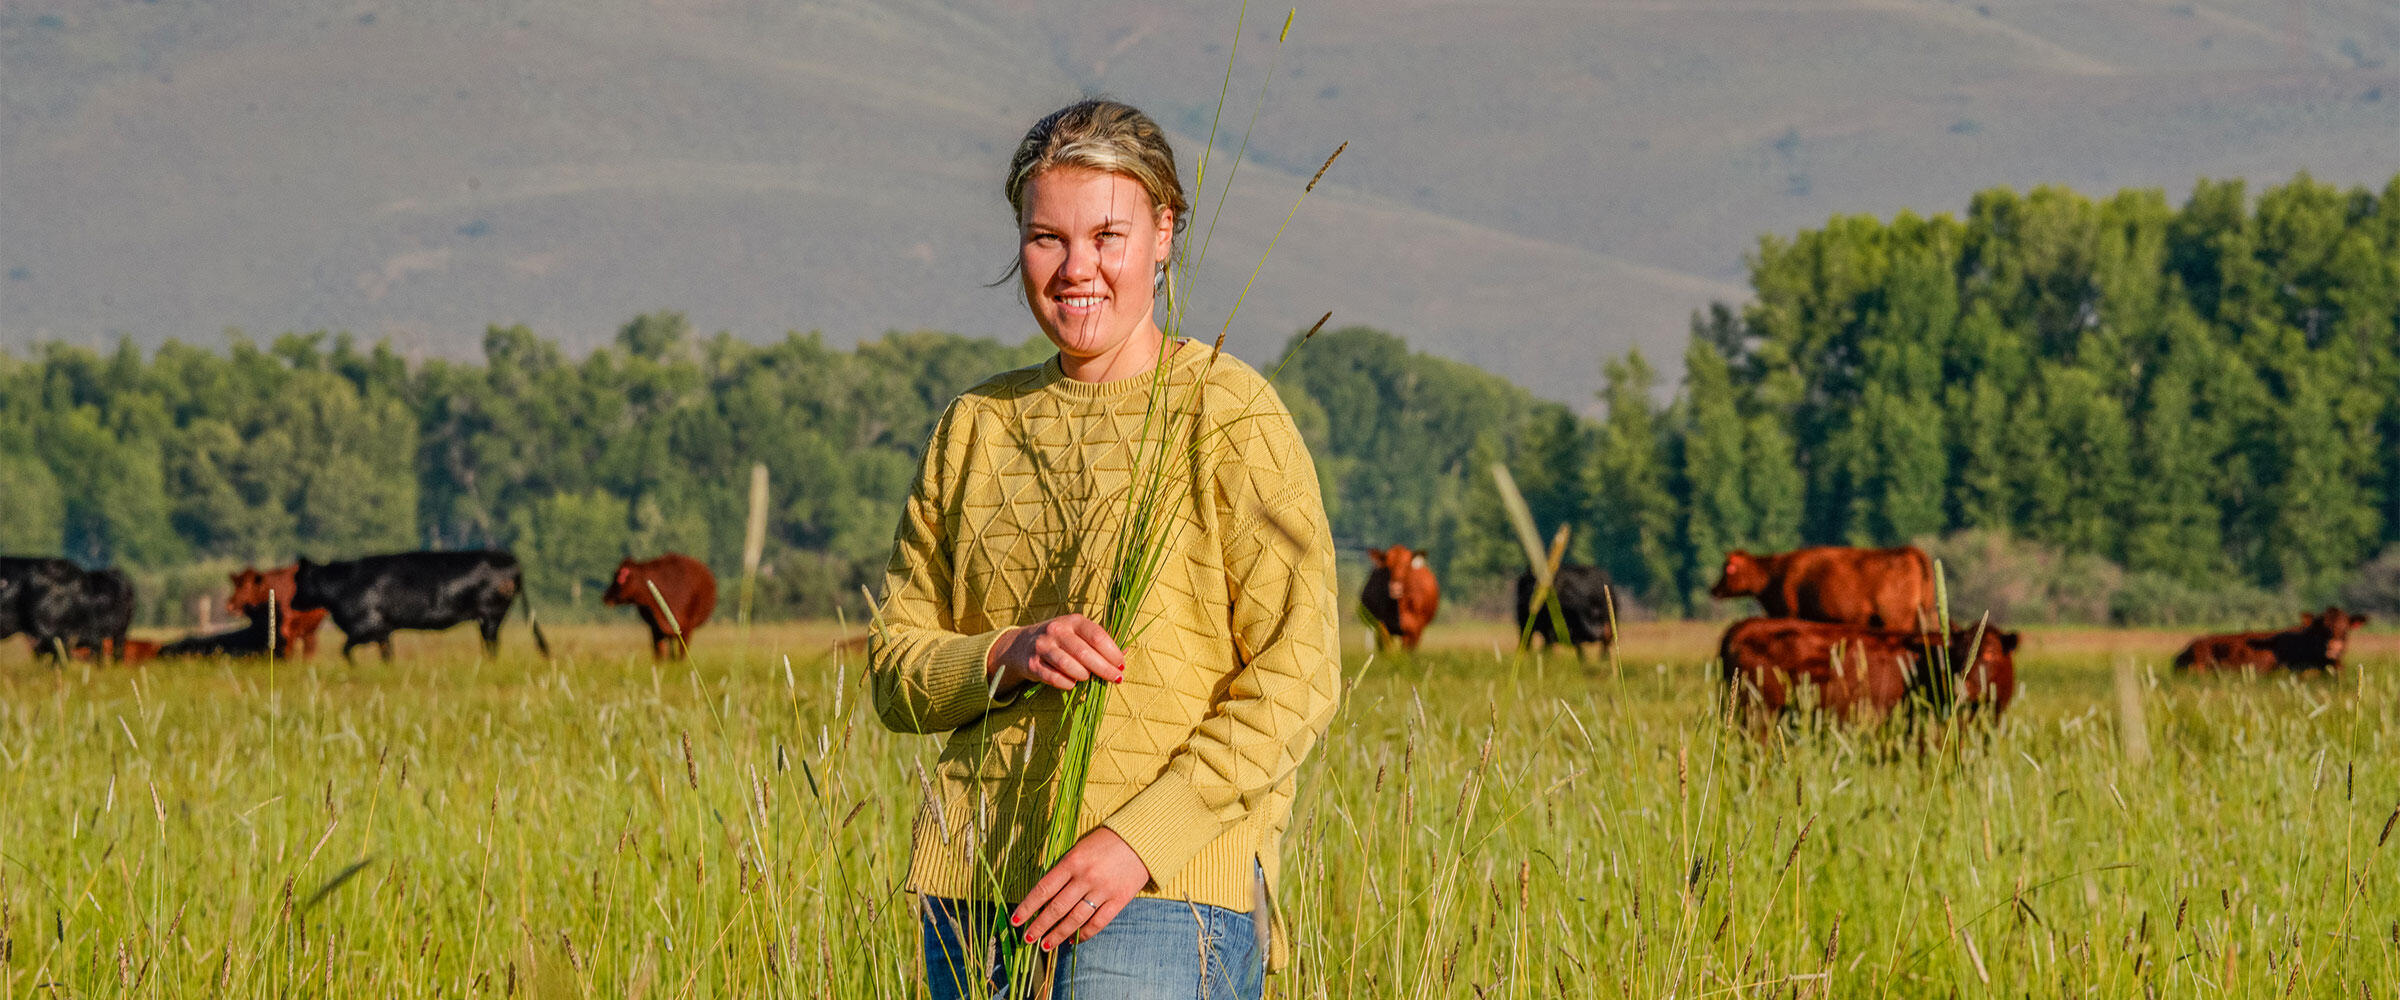 A young woman stands in a pasture with stalks of grass in her hands.